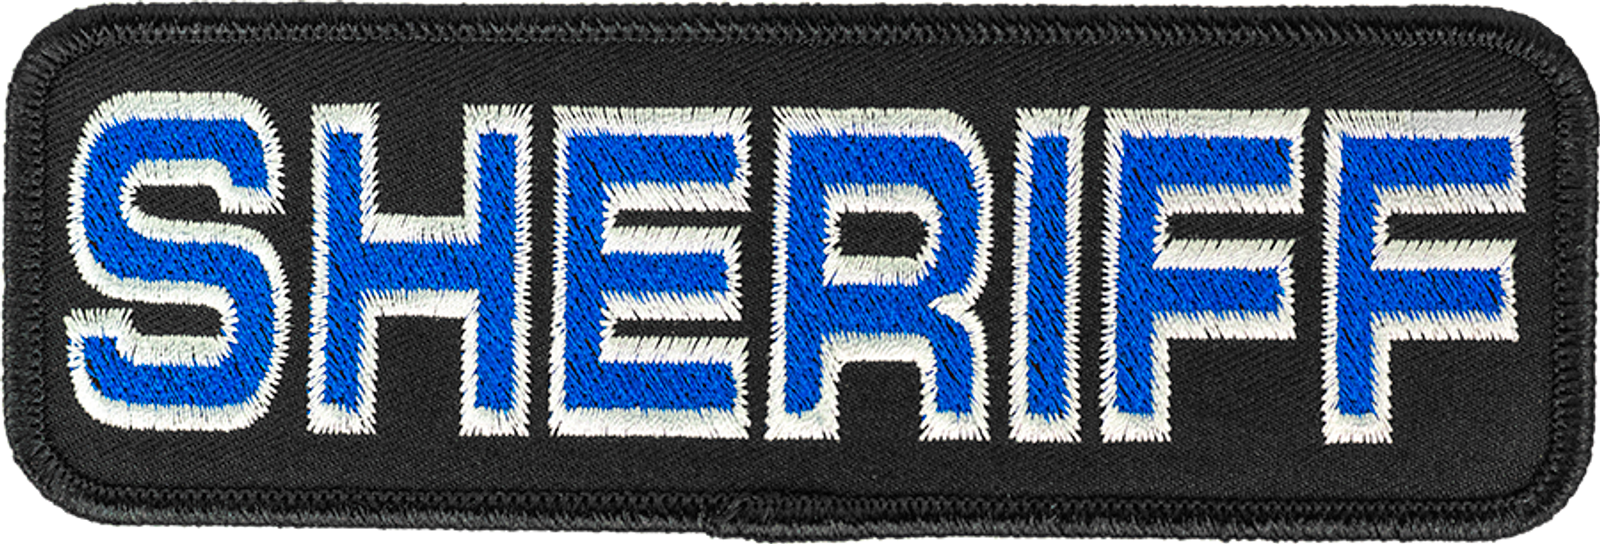 2x6 Embroidered Patches for 2 Patch Collars